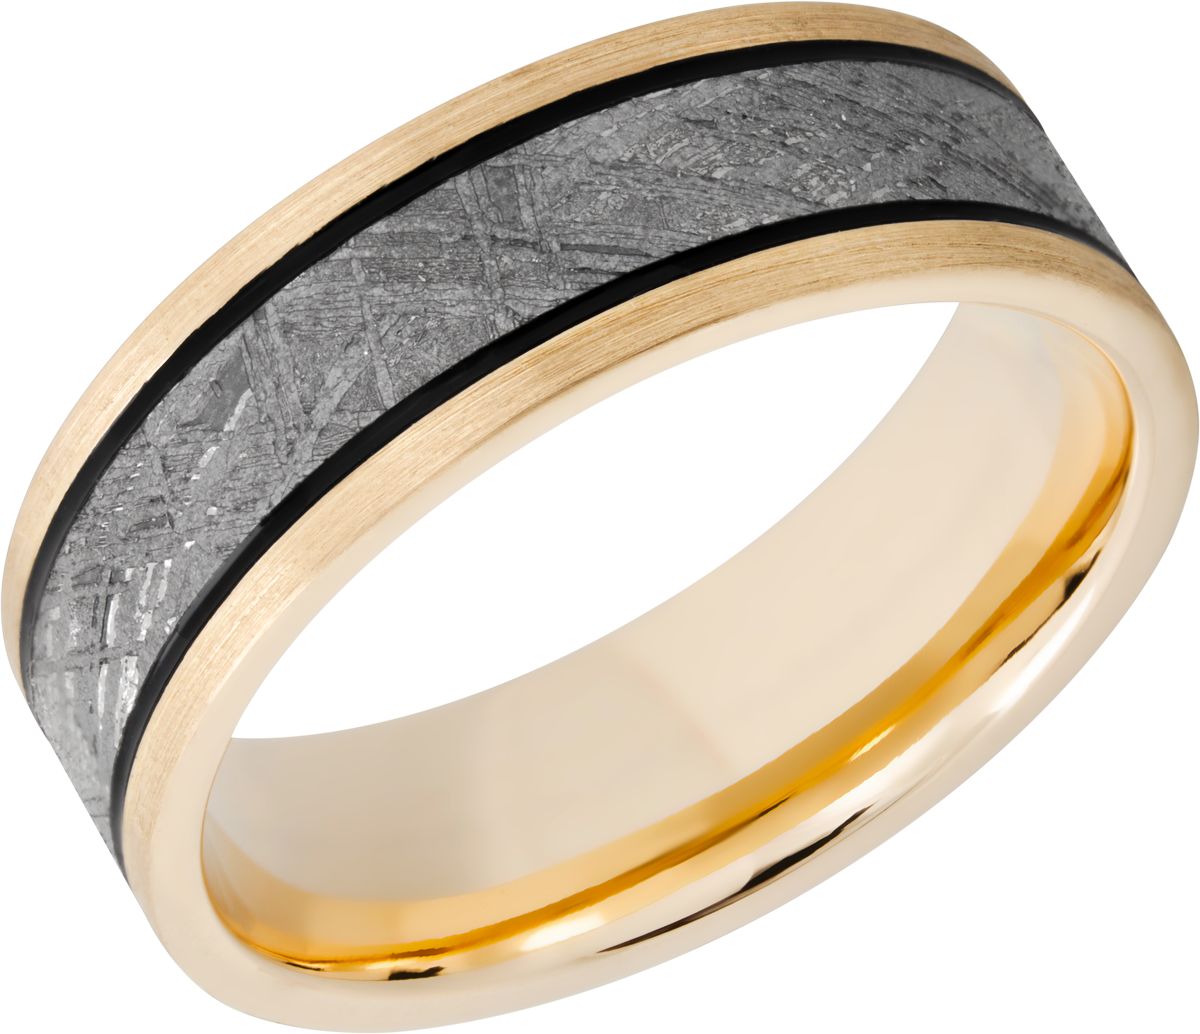 14k Yellow gold 7mm domed band with one inlay that is 5mm wide of the meteorite. SATIN